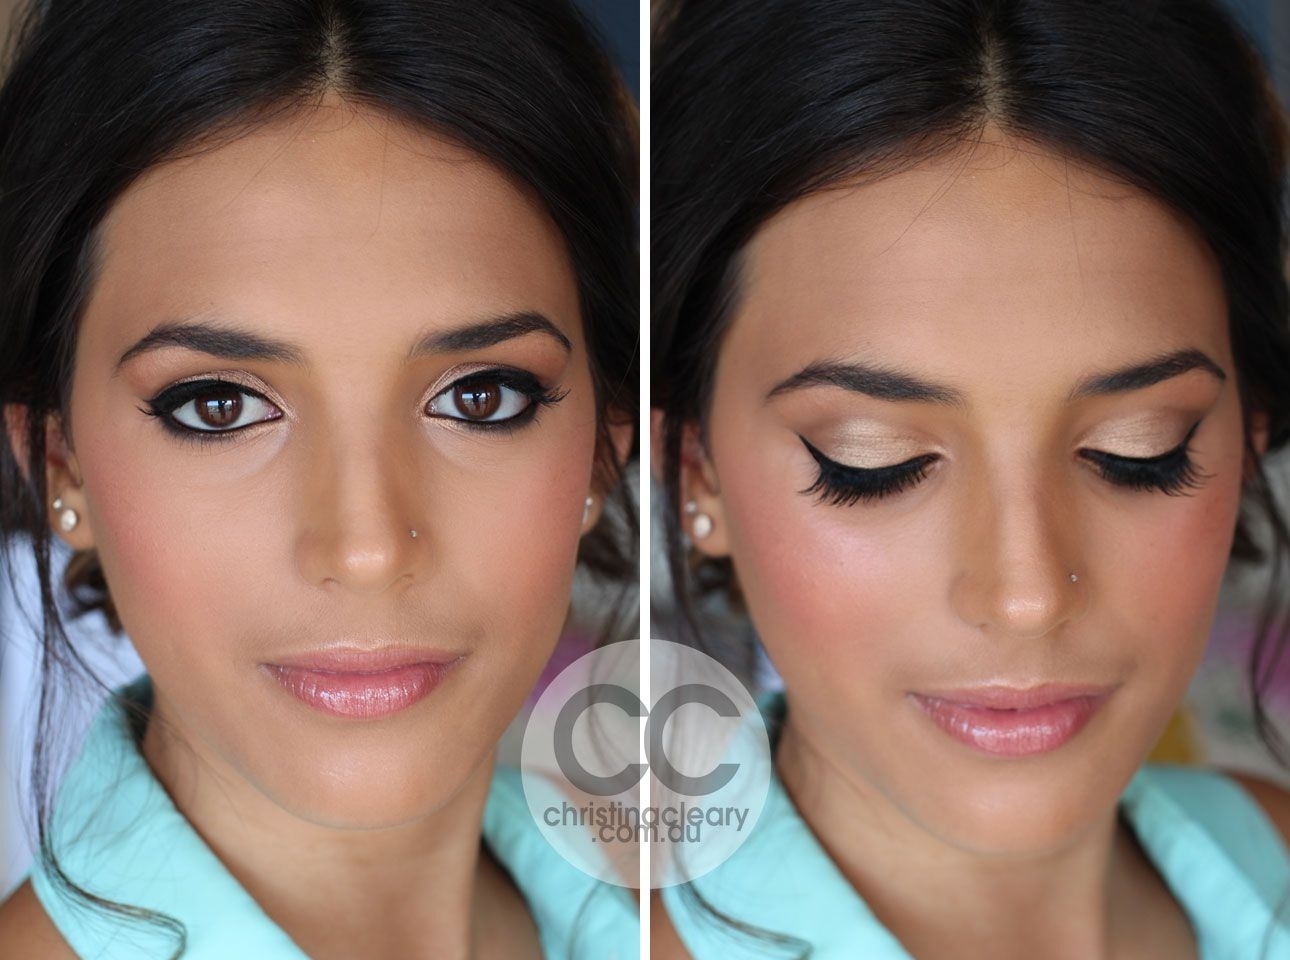 Tanned Skin, Brown Eyes, Winged Liner, Winged Eyeliner, French with Makeup Ideas For Brown Eyes And Tan Skin